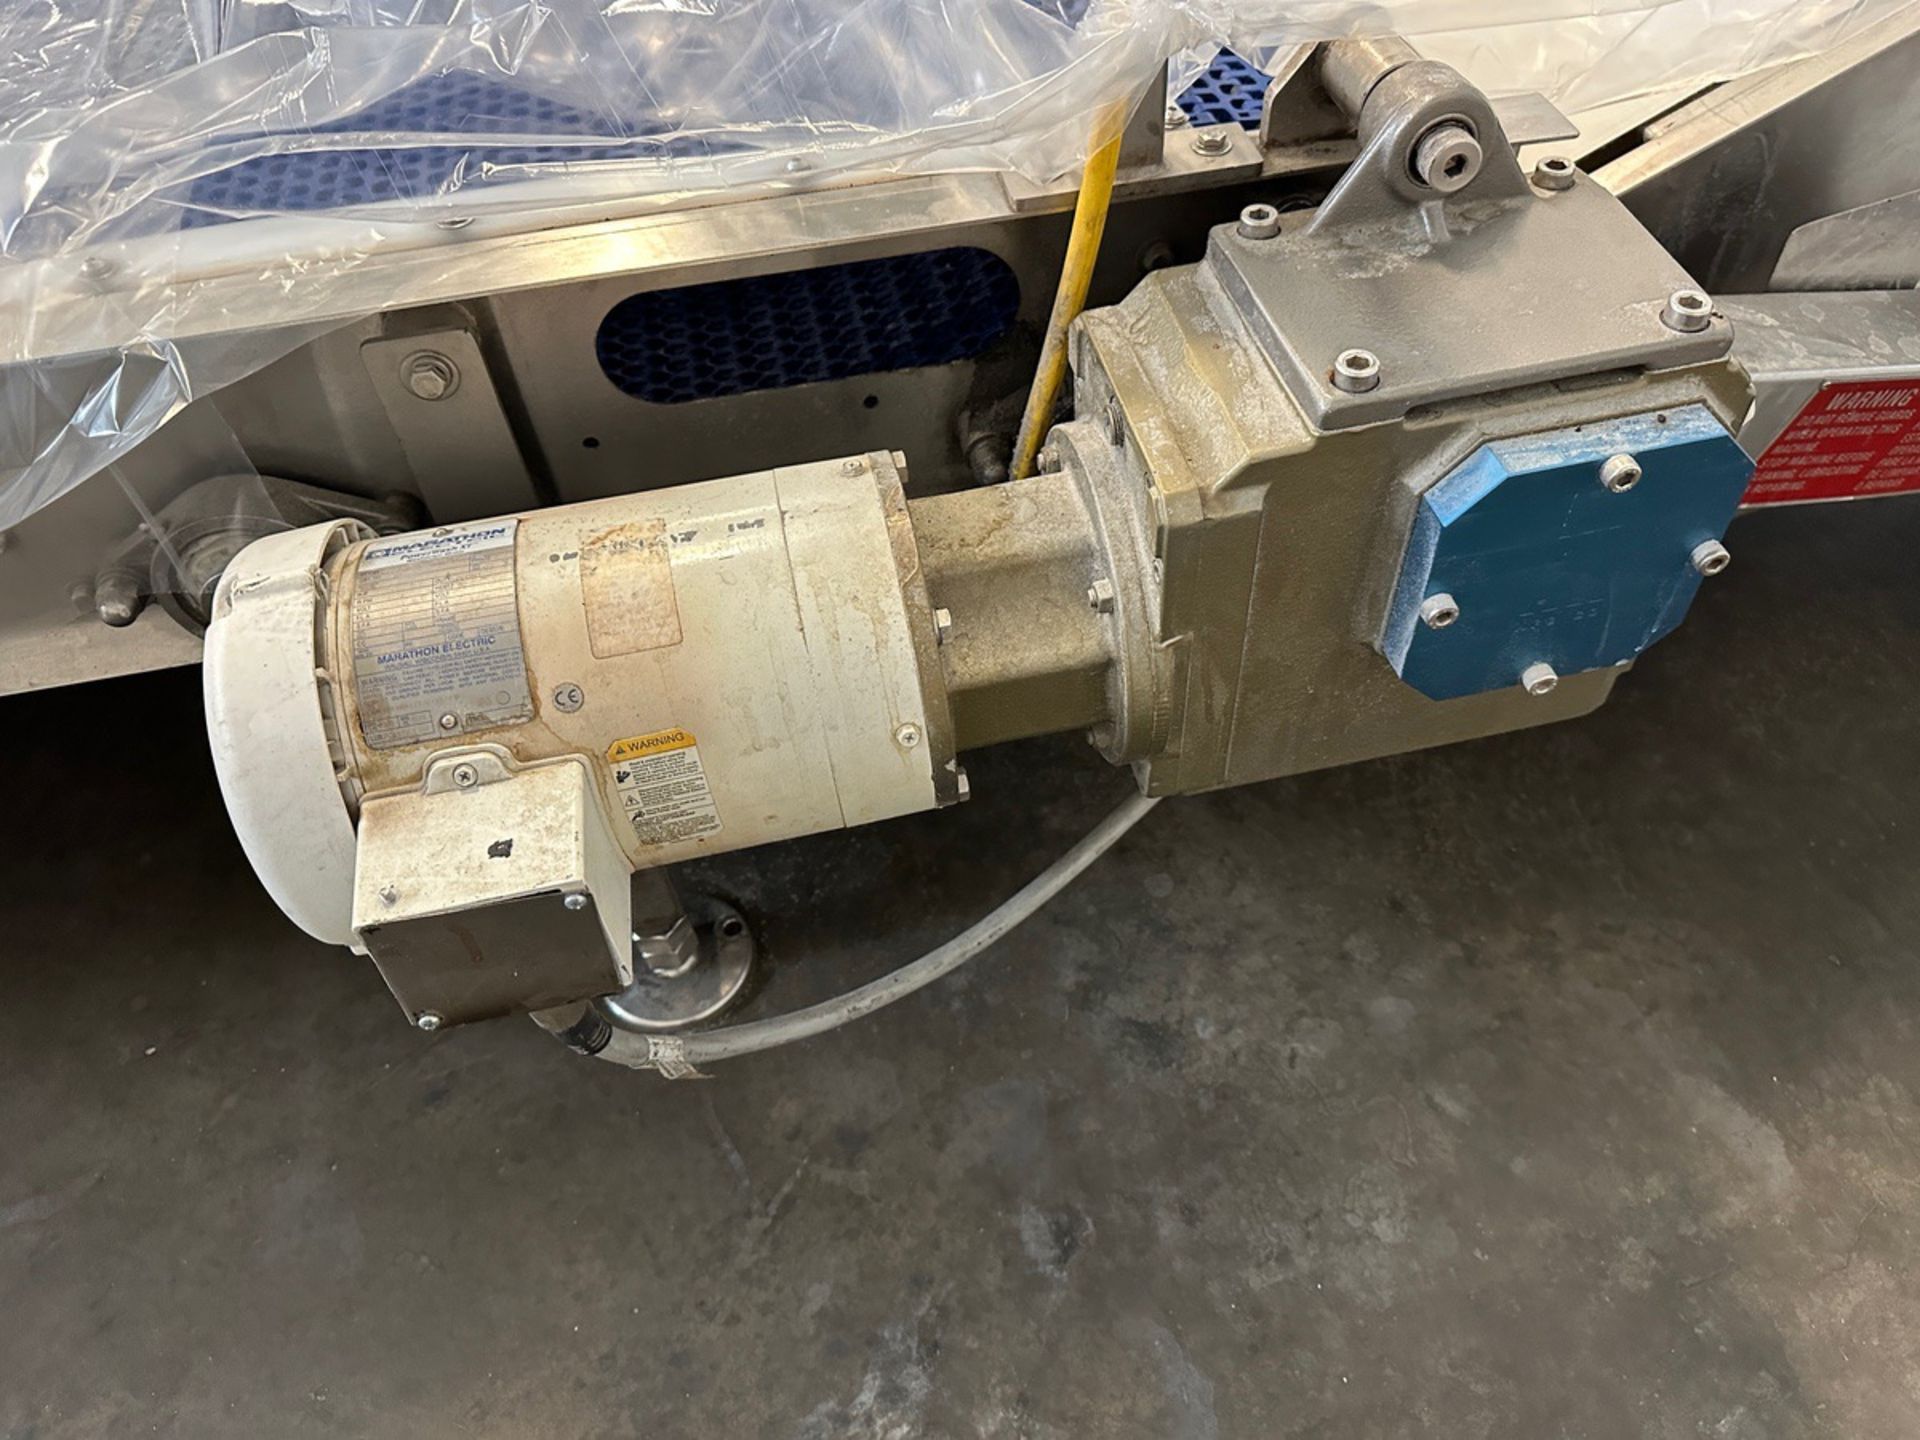 2019 AM Manufacturing Blue Belt Plastic Intralox Conveyor over Stainless Steel Fram | Rig Fee $1500 - Image 6 of 6